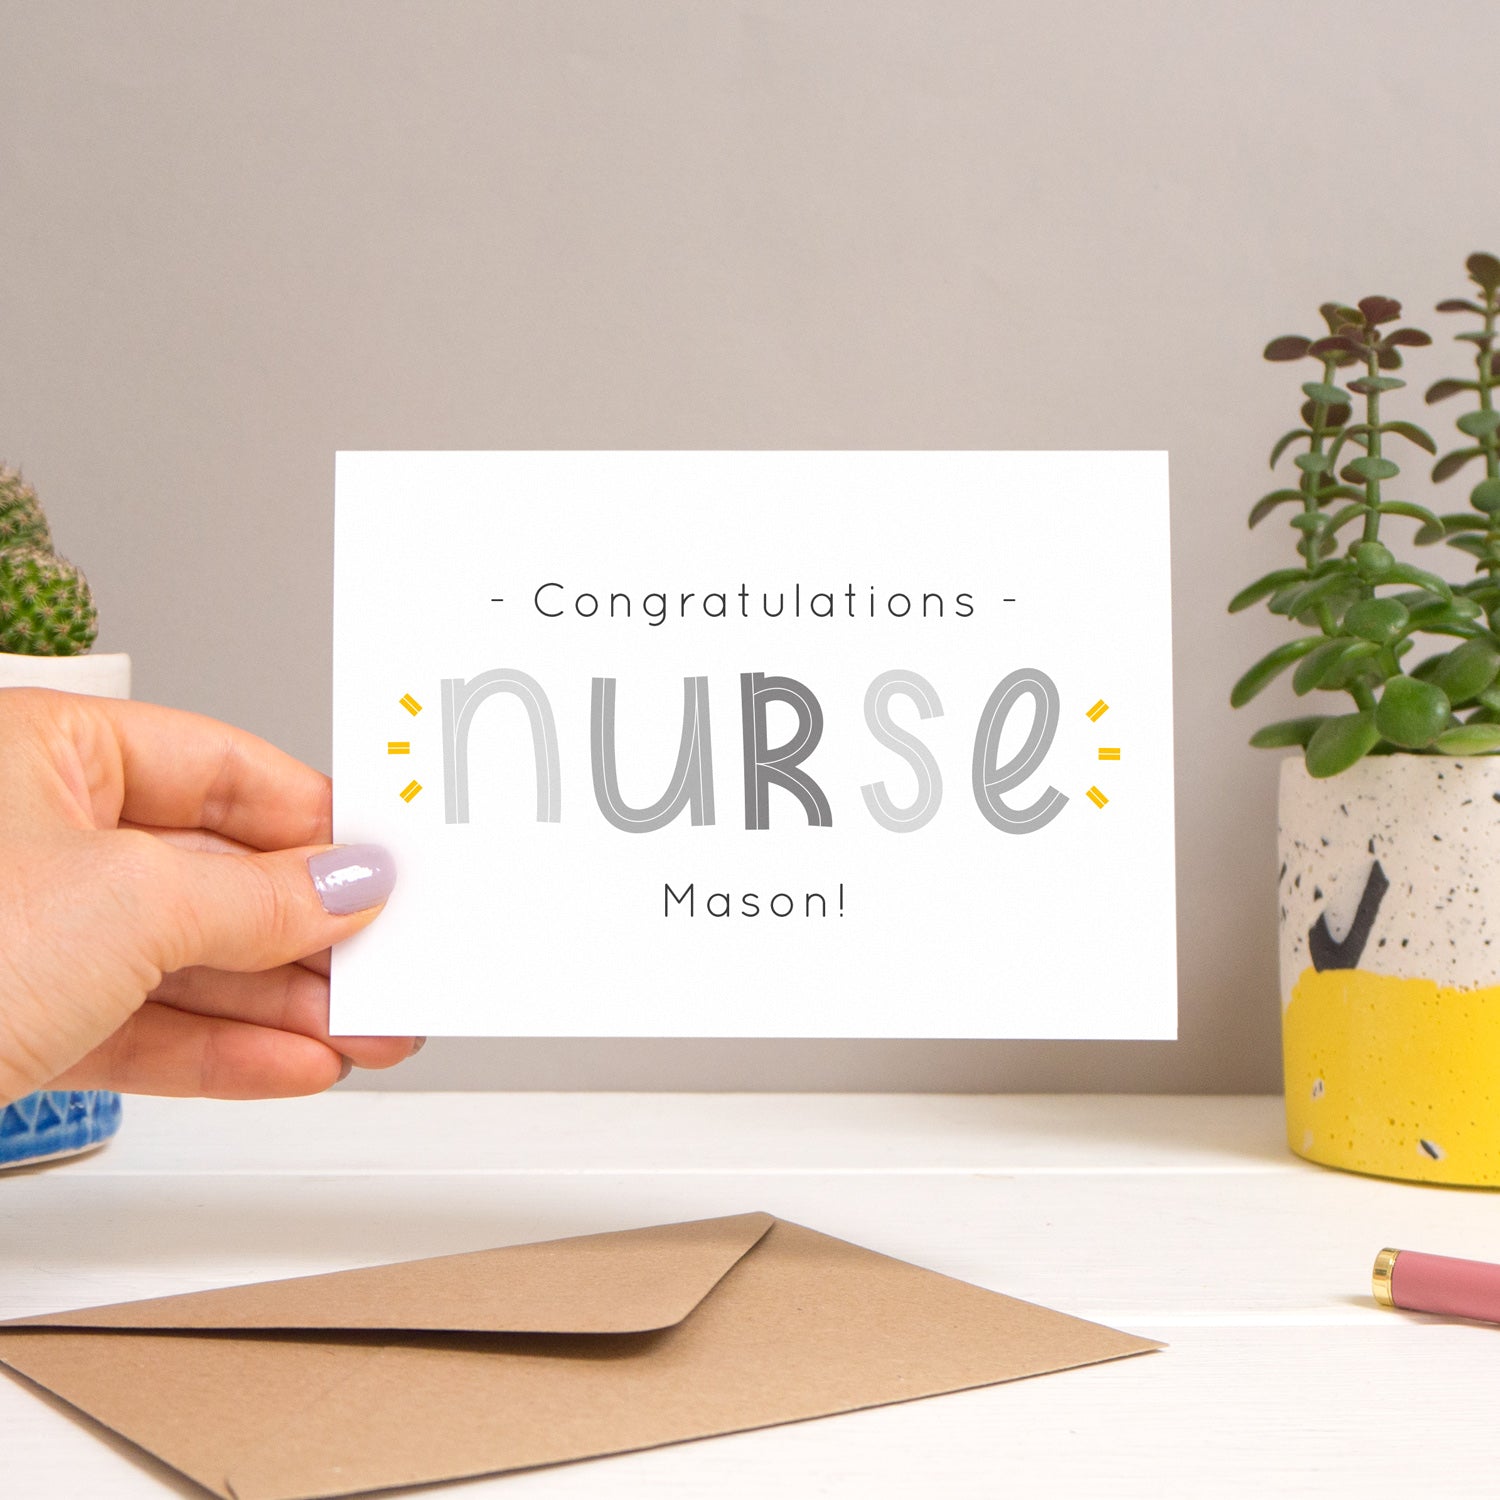 A personalised nurse card held over a warm grey and white background with potted plants peeping the sides. Behind the card is a kraft brown envelope that comes with the card. The text on this version of the card is in varying tones of grey.